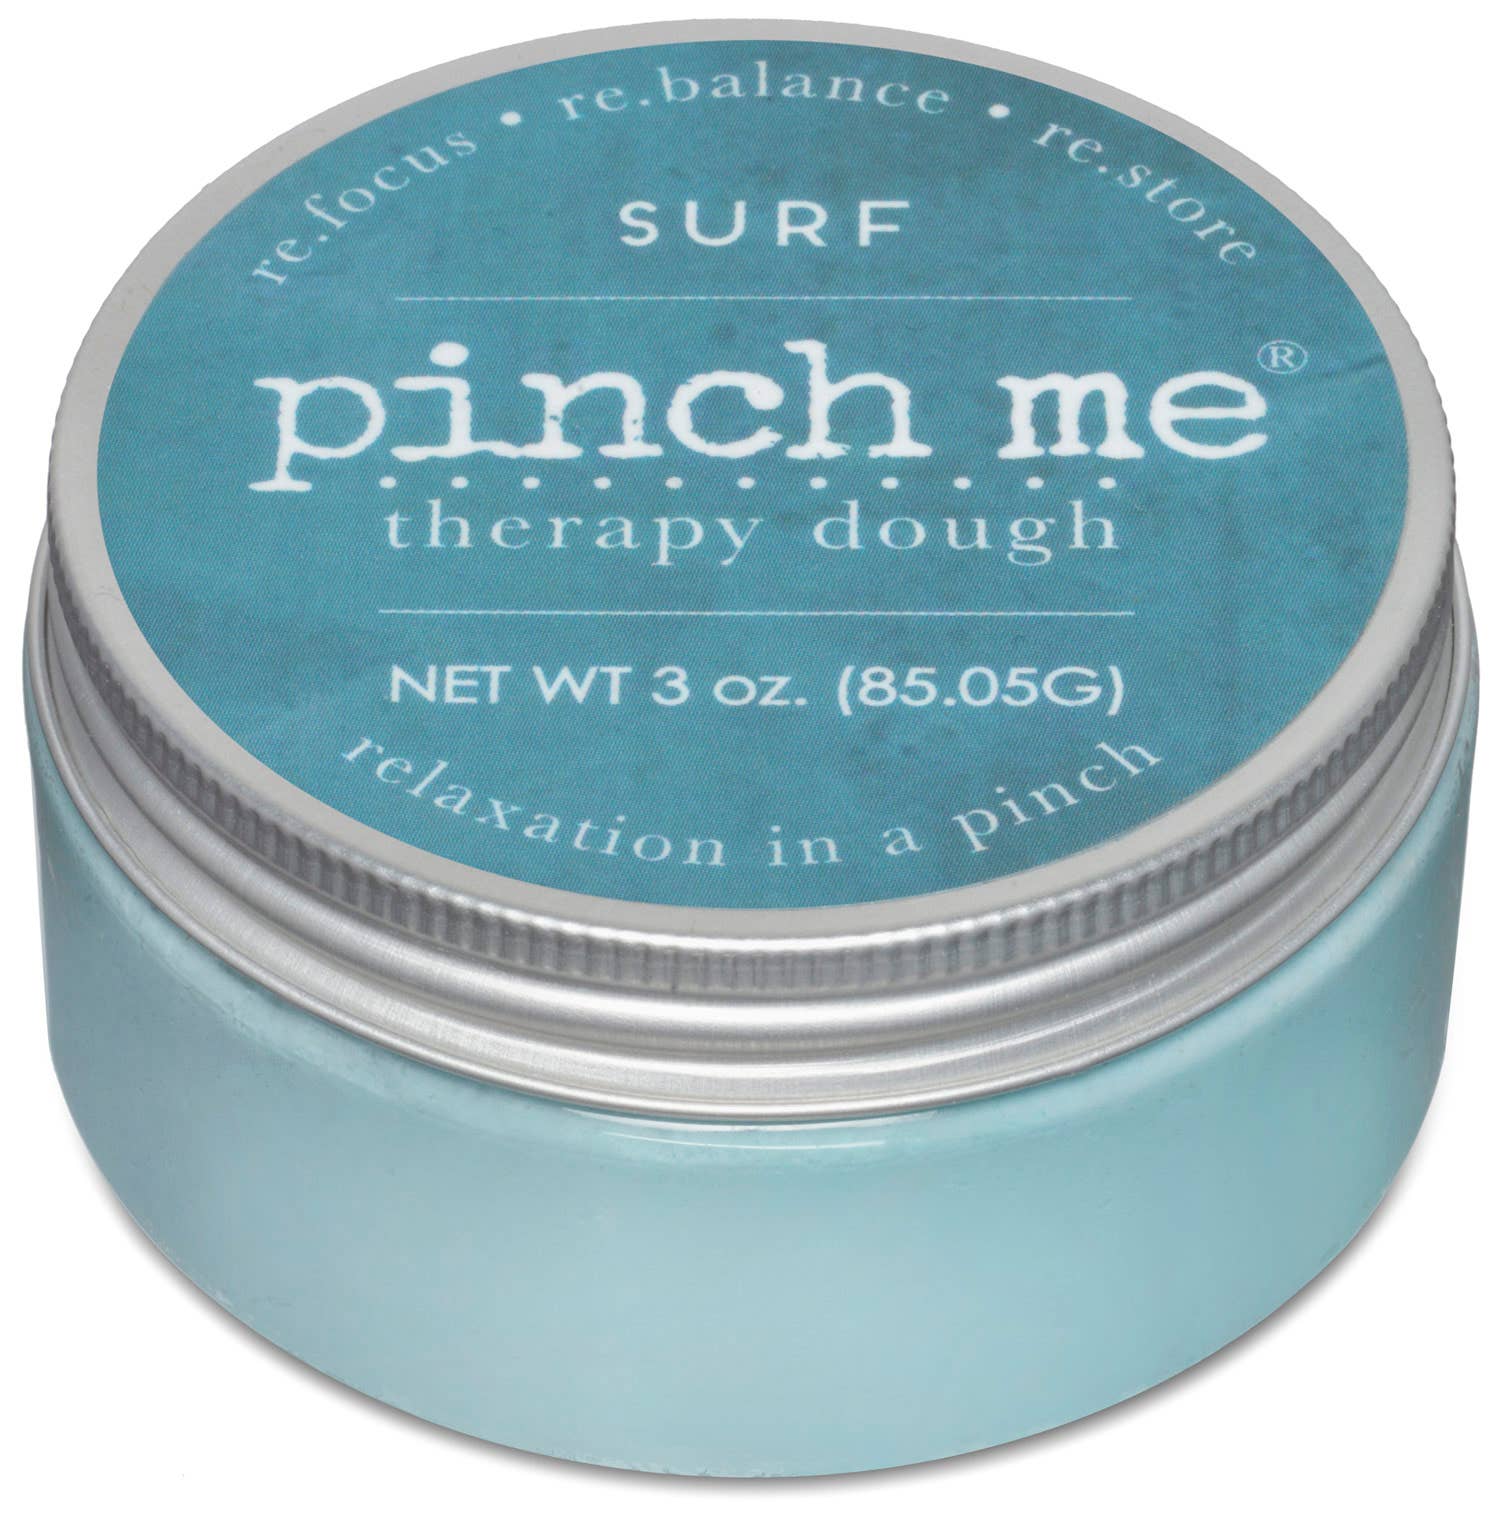 Brand of Bliss Pinch Me Therapy Dough Surf